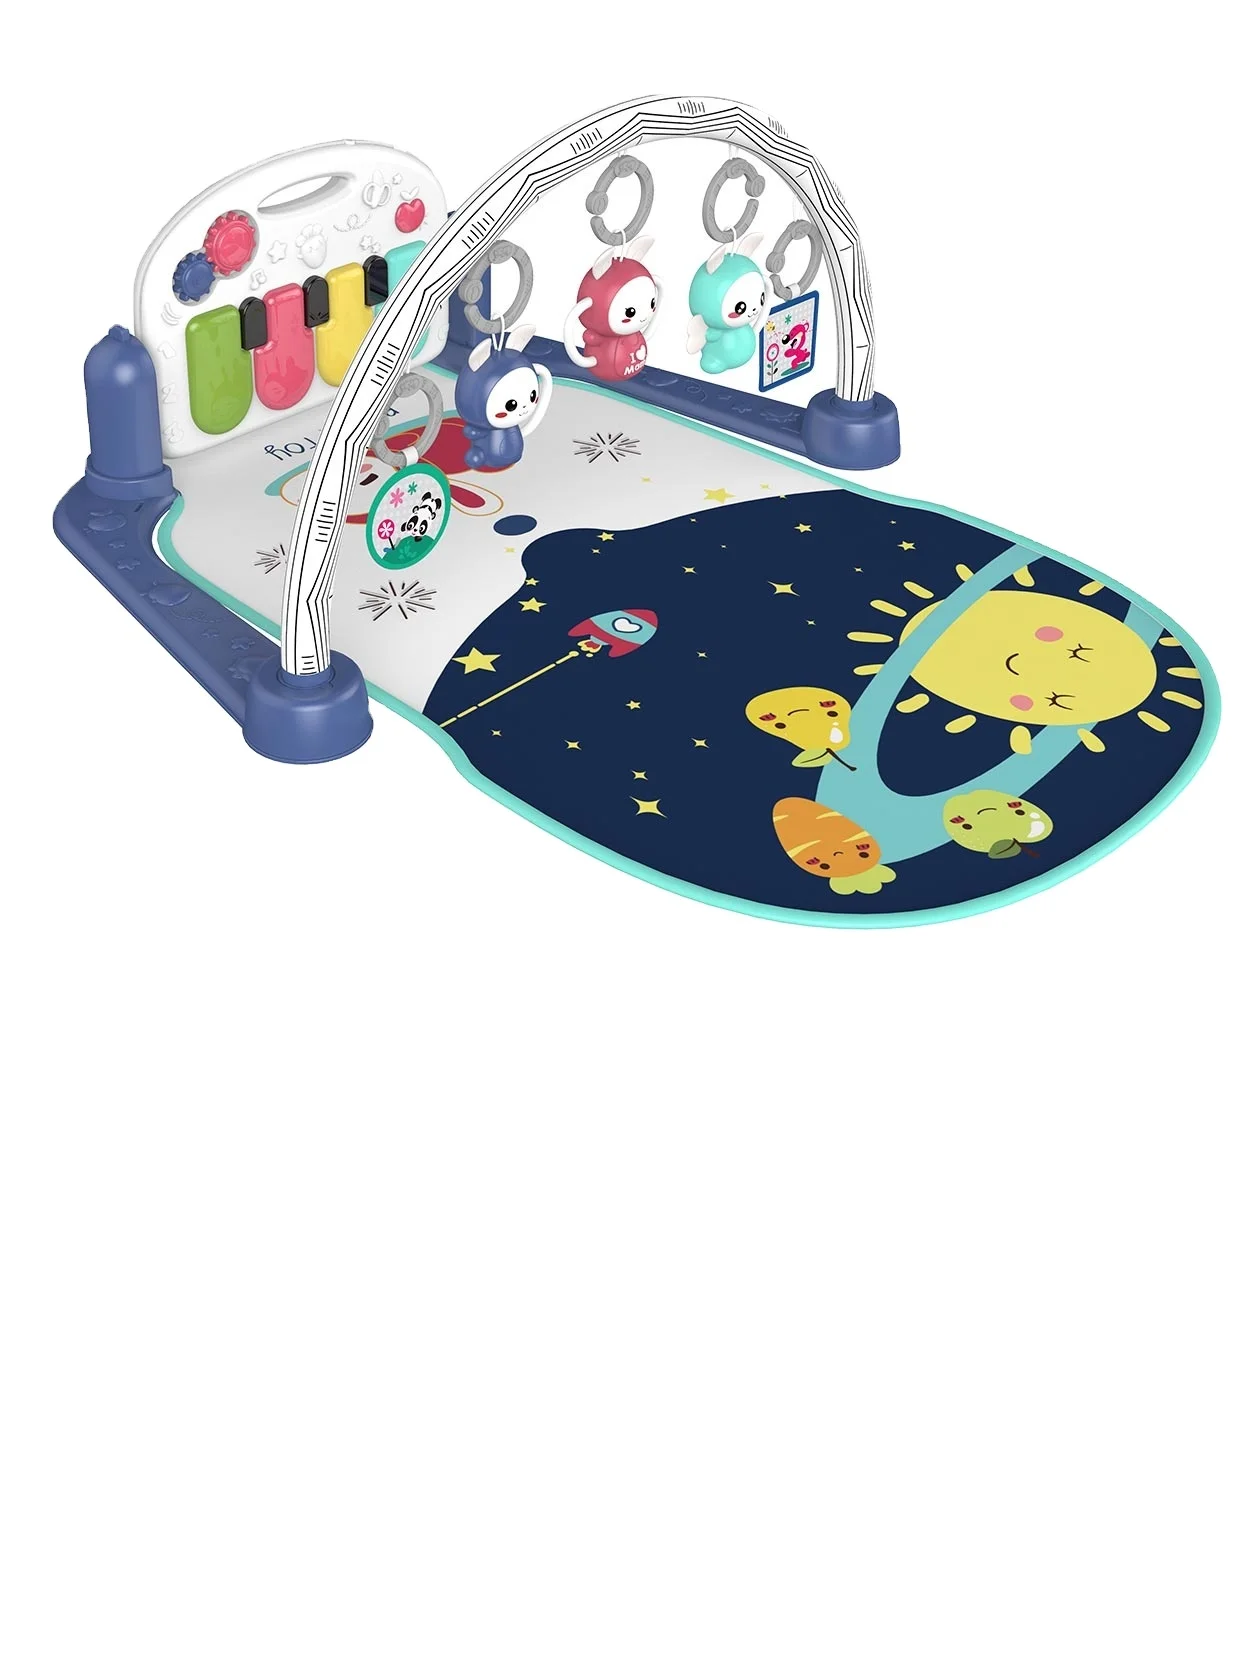 Fuying Wholesale educational soft gym carpet musical playmat activity baby piano mat